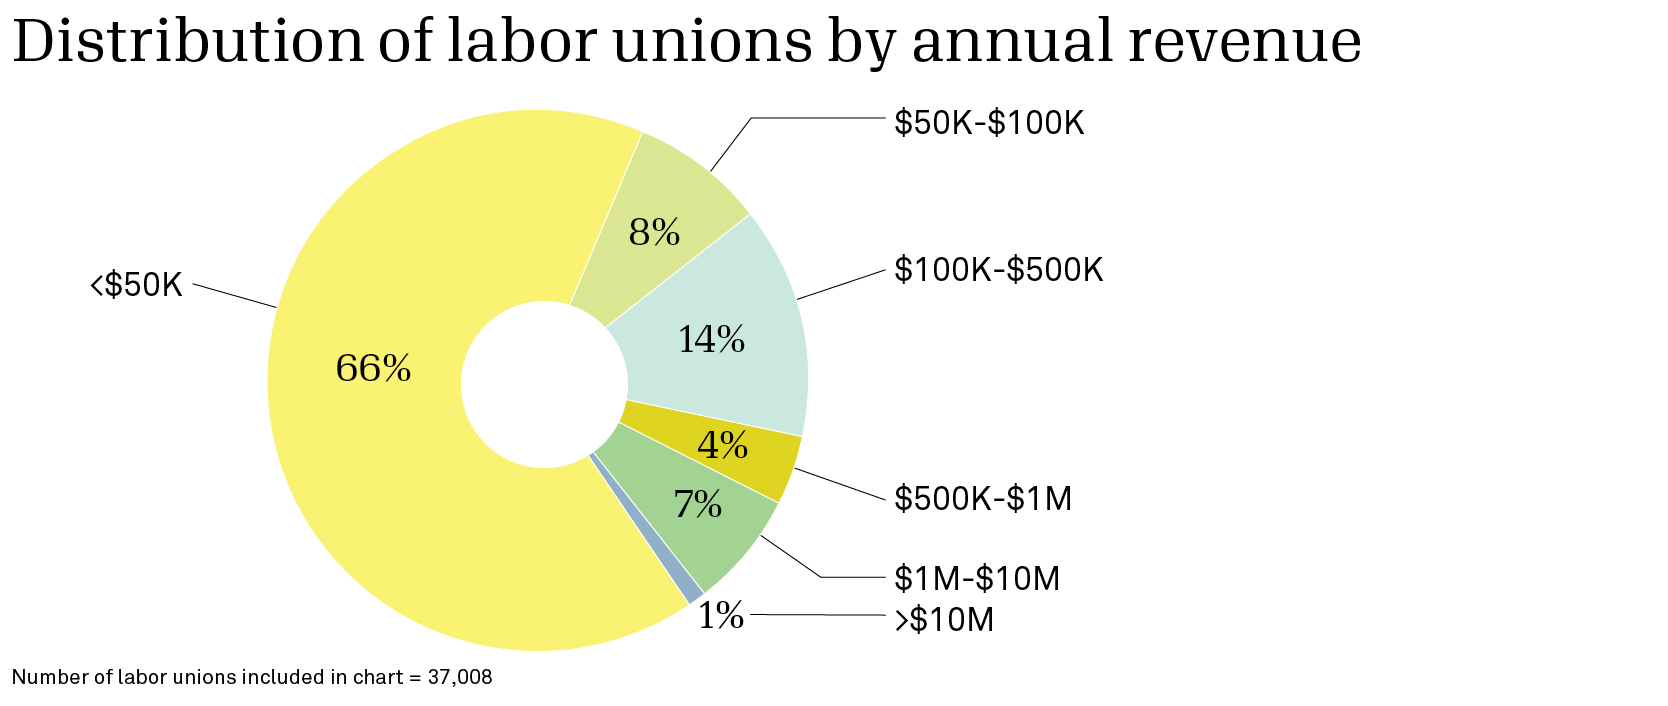 Pie chart showing distribution of labor unions by annual revenue